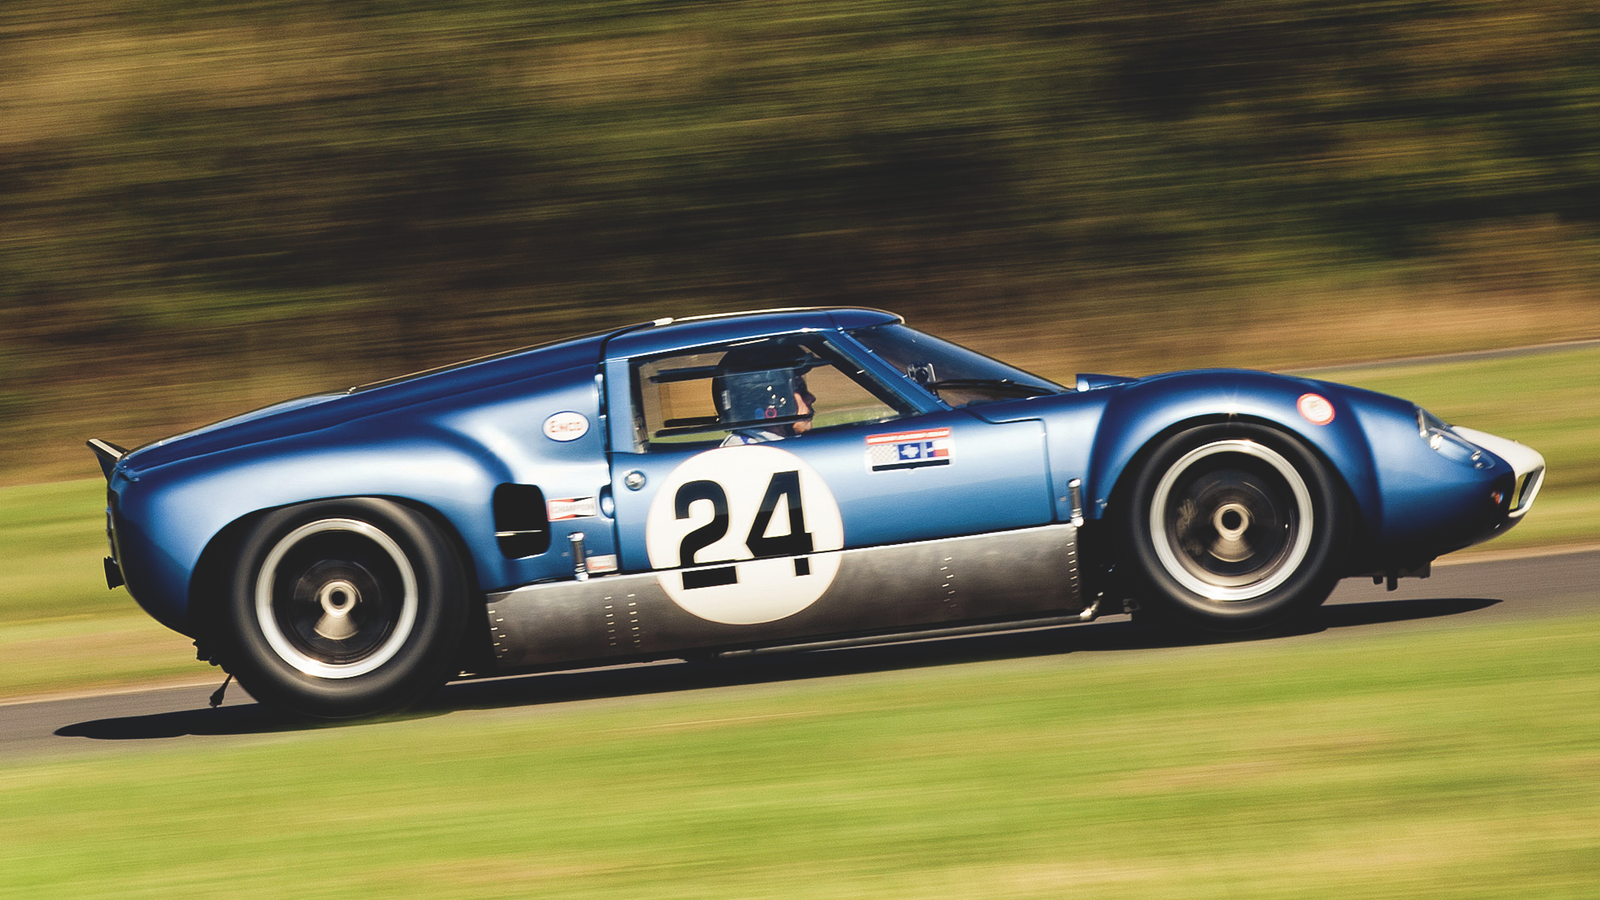 This car inspired the Ford GT40